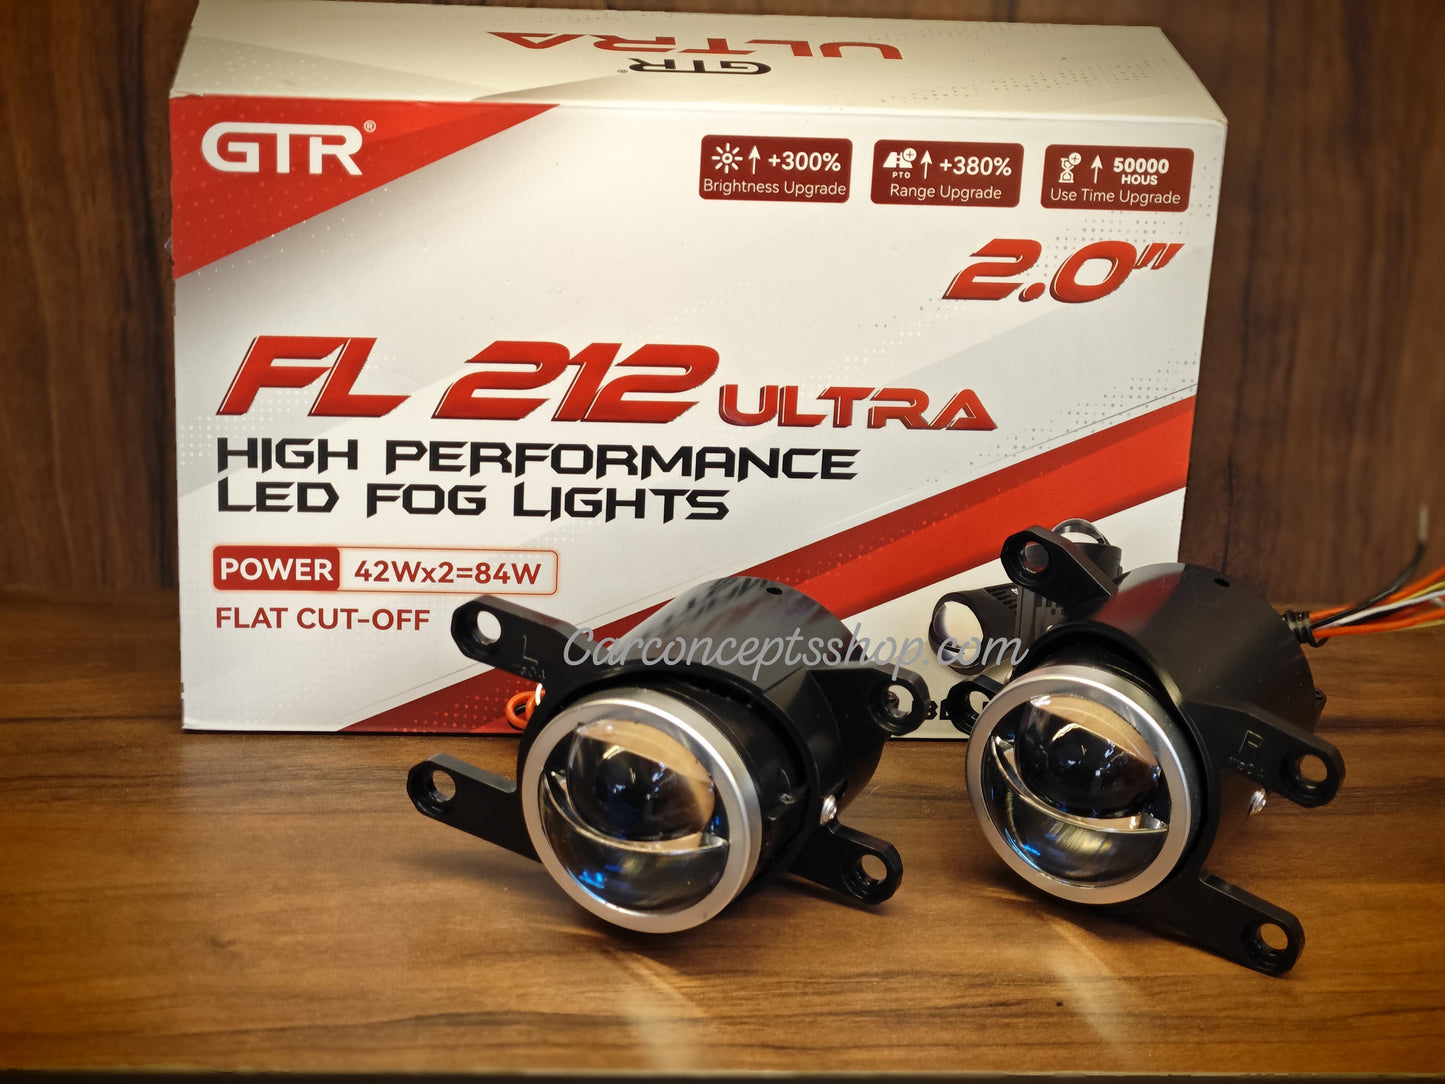 GTR FL 212 ultra 2 inch Fog Projector Lamp with High/ Low Beam Blue lens